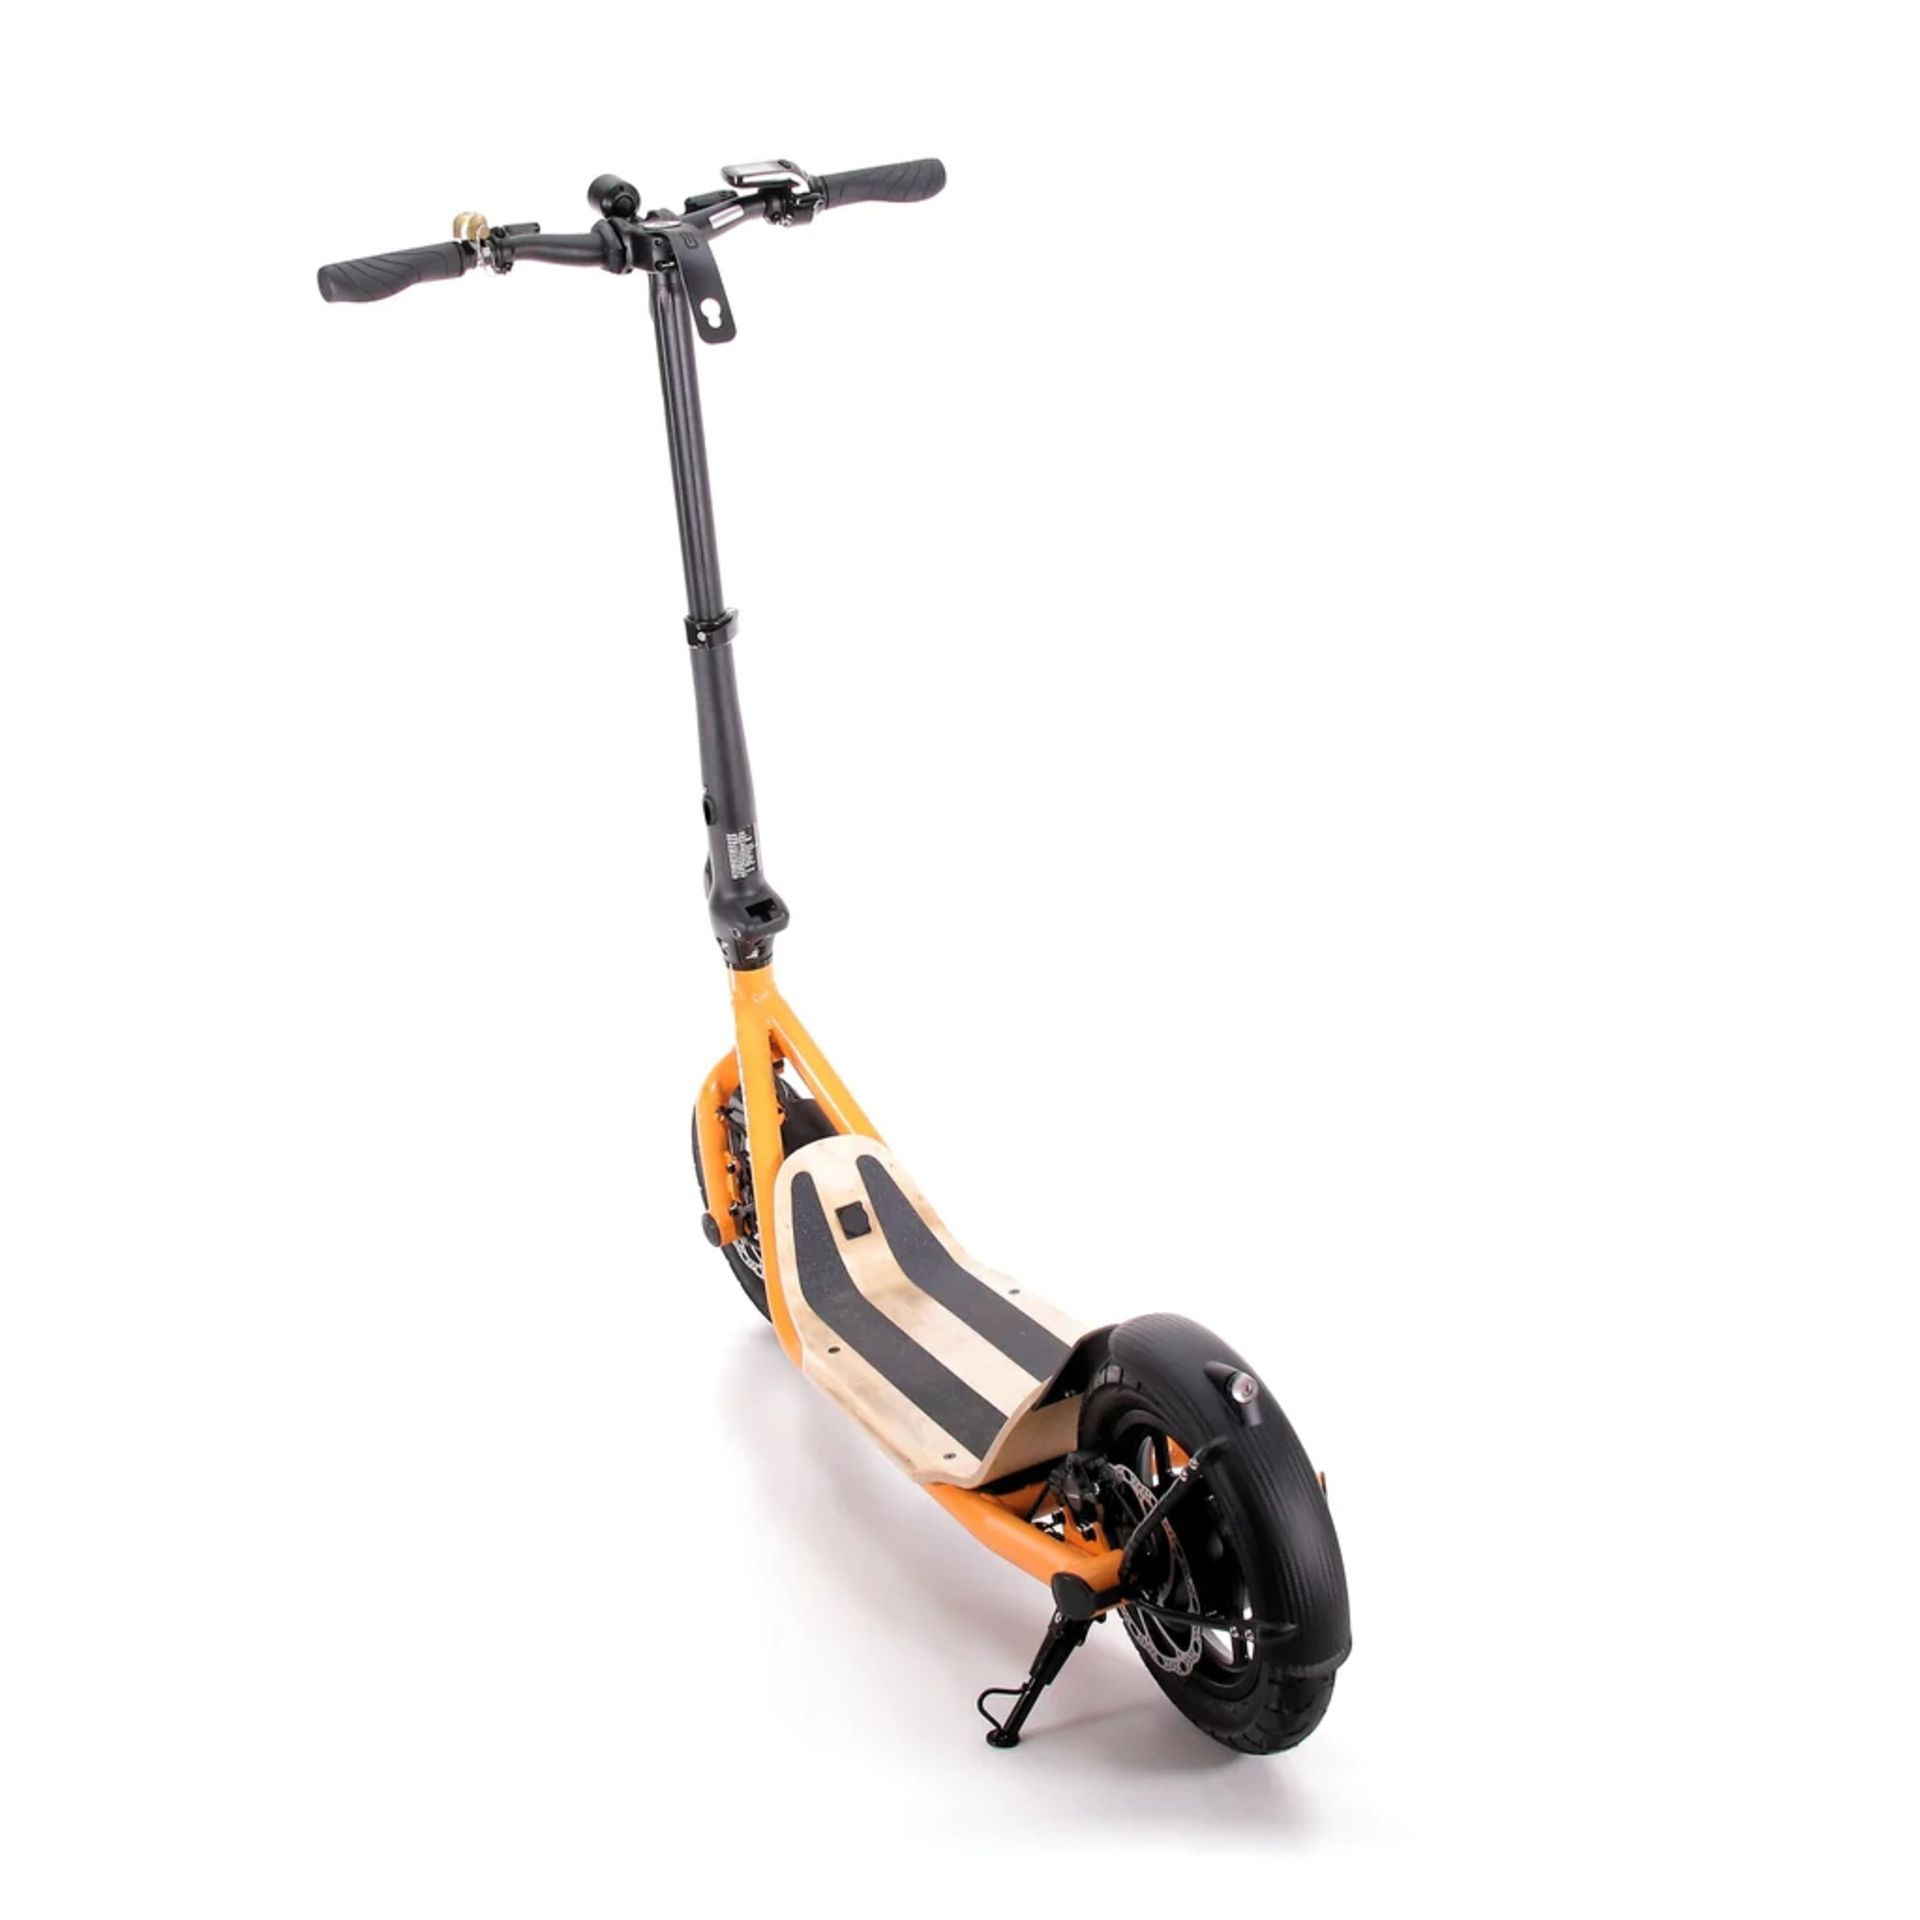 BRAND NEW 8TEV B12 PROXI ELECTRIC SCOOTER ORANGE RRP £1299, Perfect city commuter vehicle with - Bild 2 aus 2